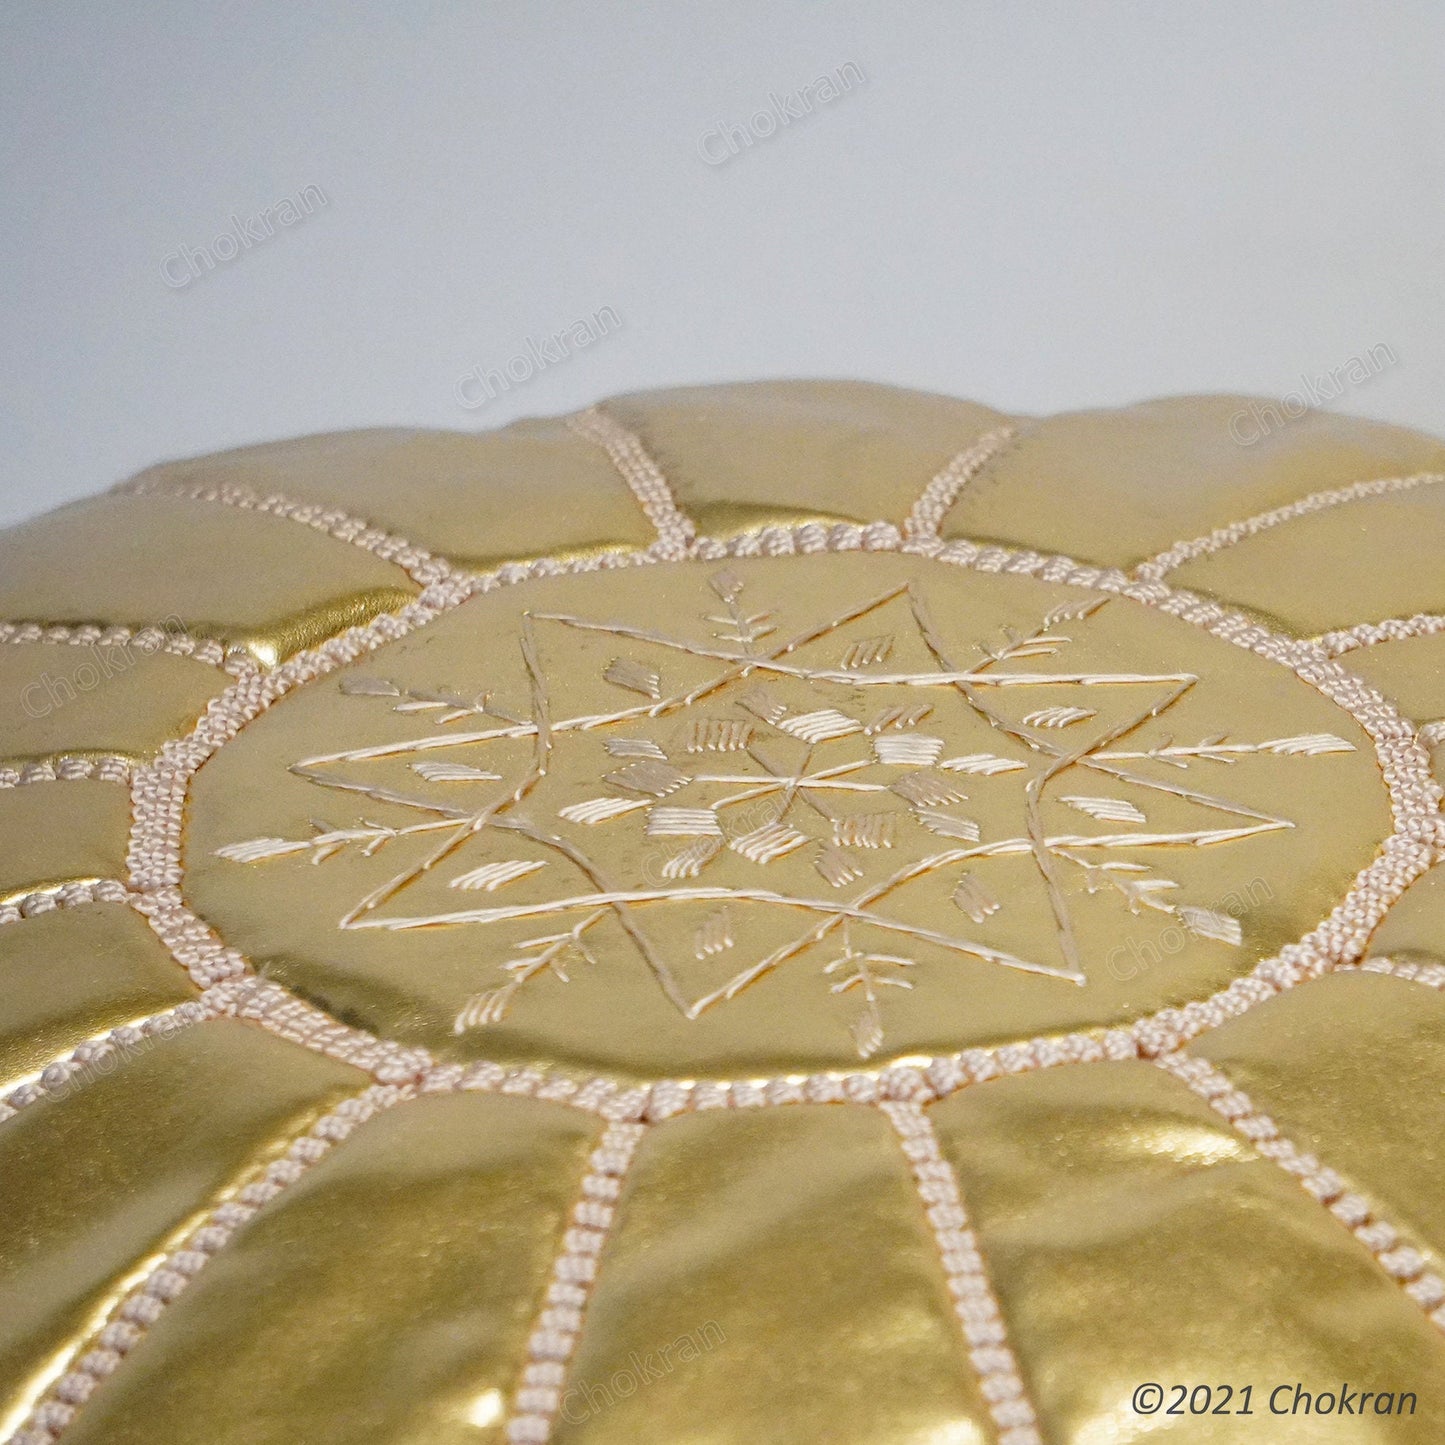 Gold Moroccan leather pouf, round leather ottoman, handmade leather pouf, Moroccan genuine leather footstool-UNSTUFFED